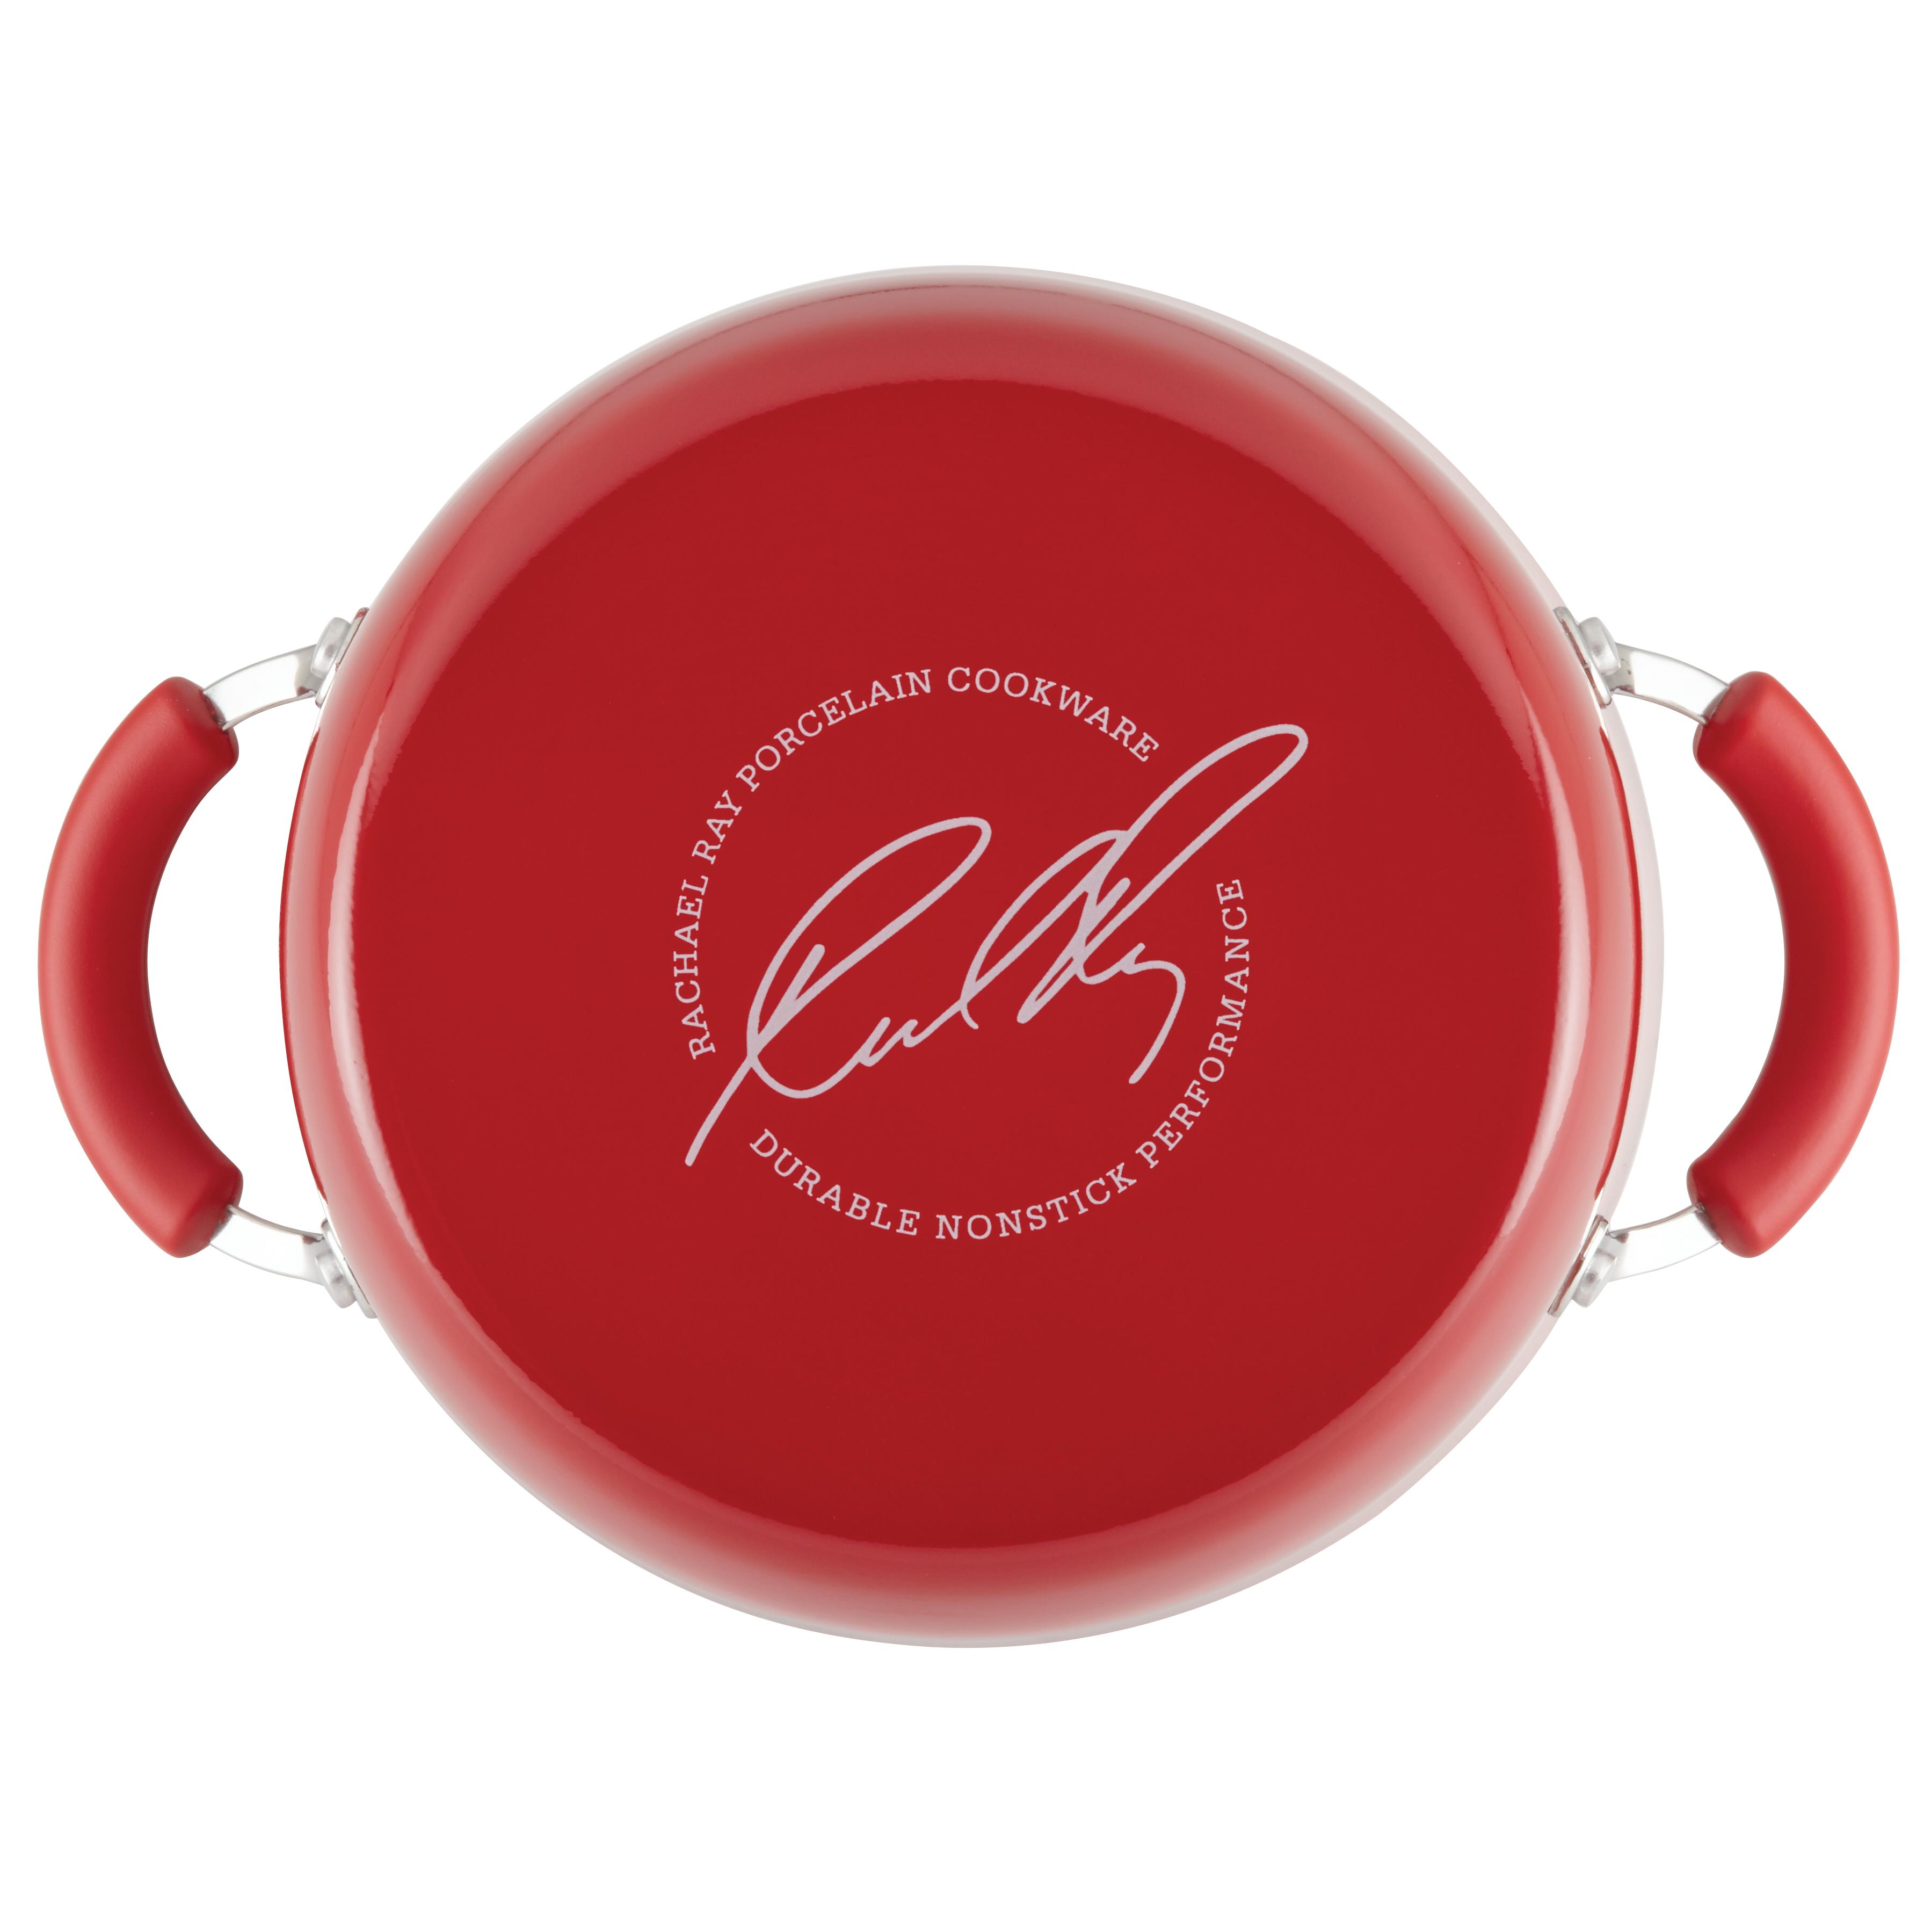 Rachael Ray 16-Piece Classic Brights Porcelain Nonstick Pots and Pans/Cookware Set, Red - image 3 of 6